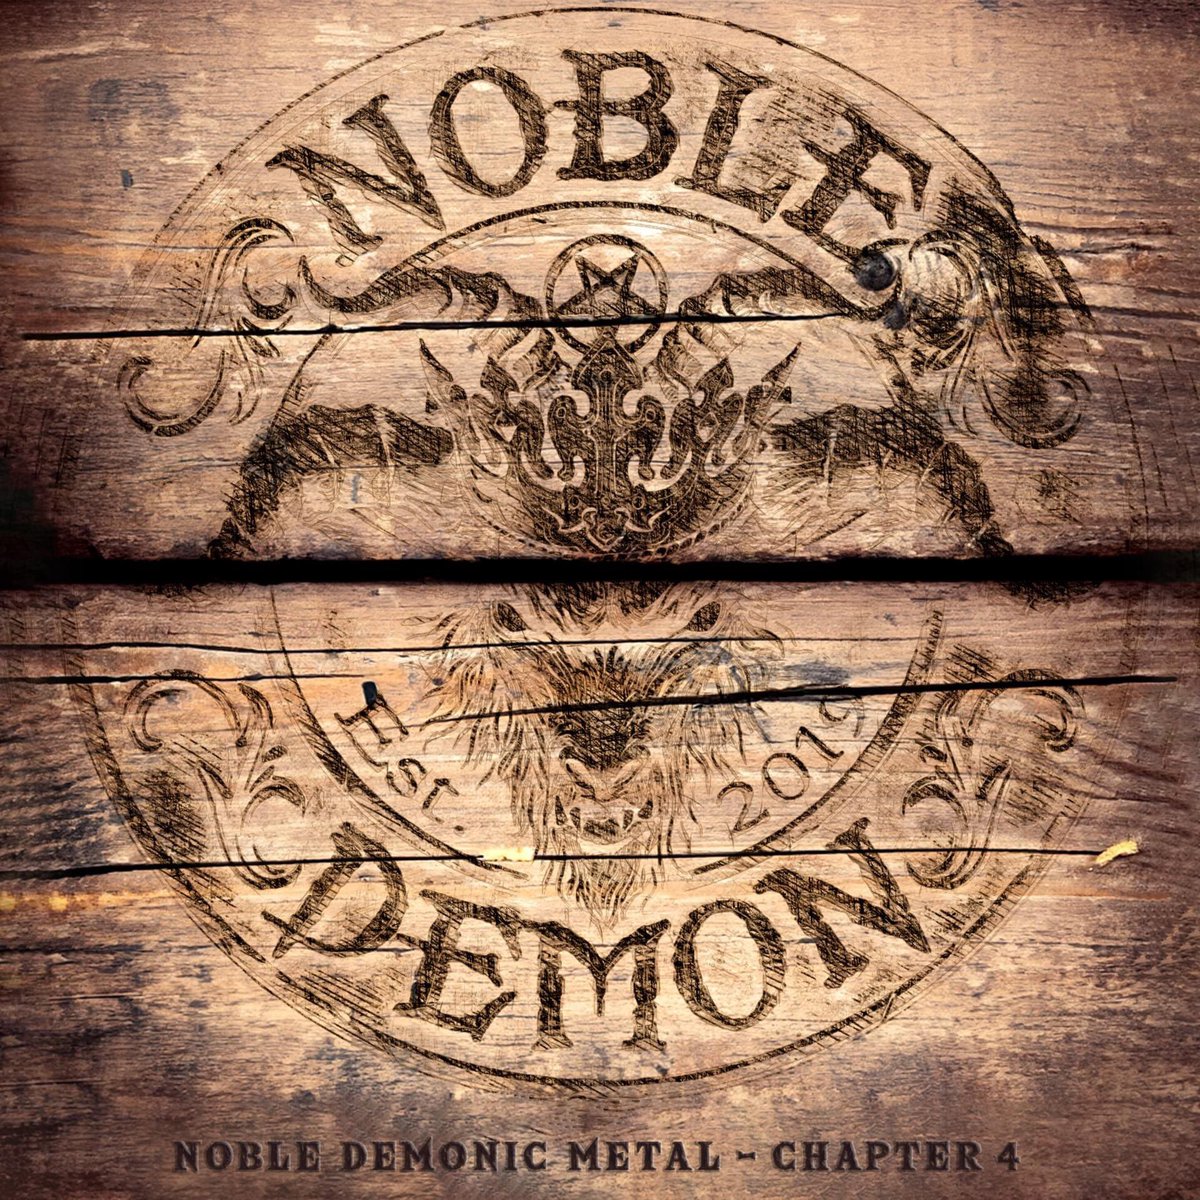 NOBLEDEMON releases brand new #metallabel #sampler: Listen now: music.nobledemon.com/chapter4 - 'Noble Demonic Metal - Chapter 4' out now!

In celebration of its fifth birthday in 2024, #NobleDemon has released another installment of its 'Noble Demonic Metal' #compilation series.